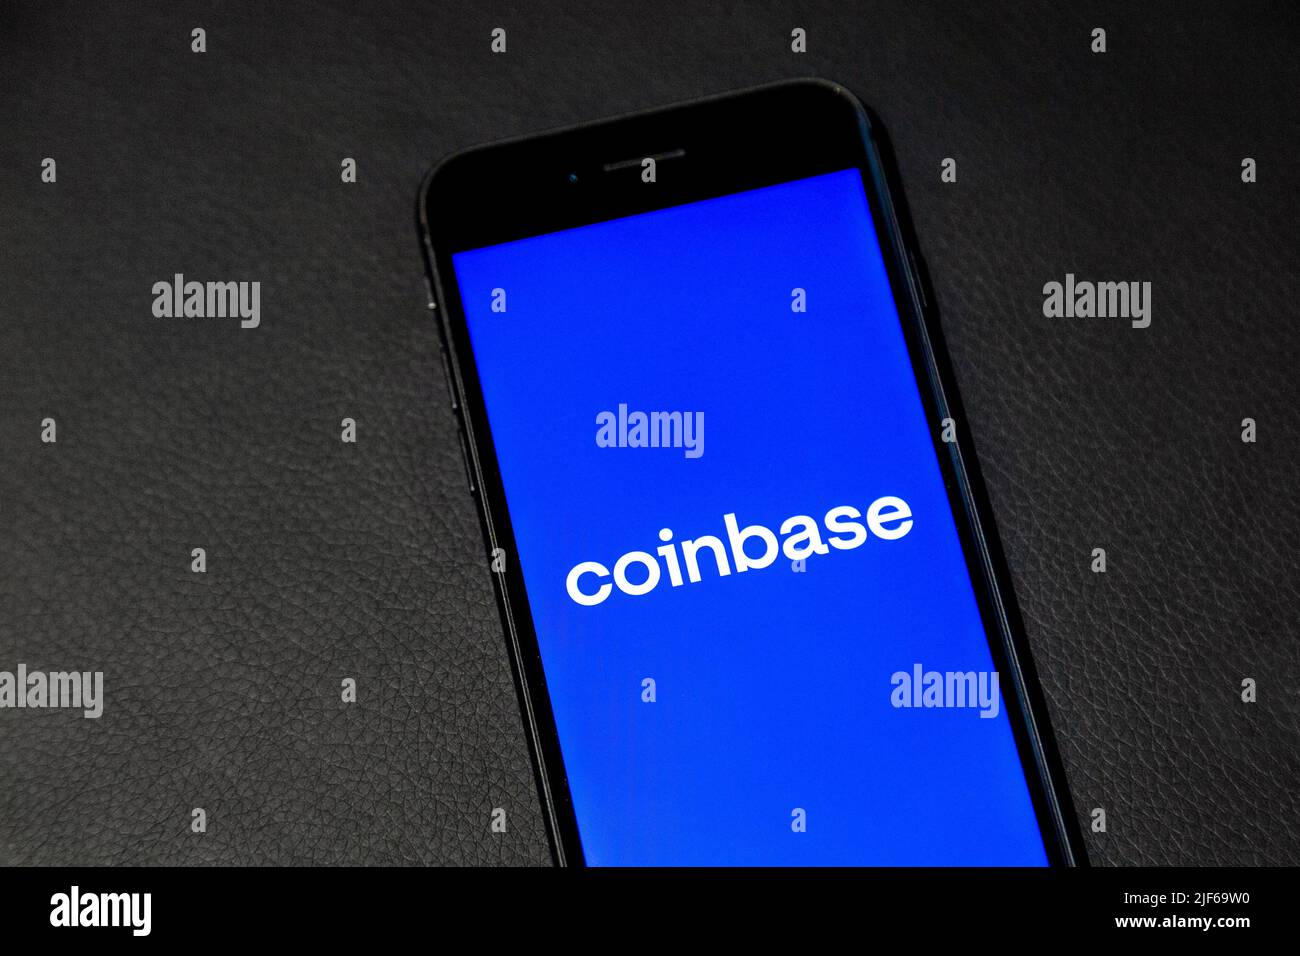 Logo of Coinbase crypto exchange on a phone screen against leather background Stock Photo